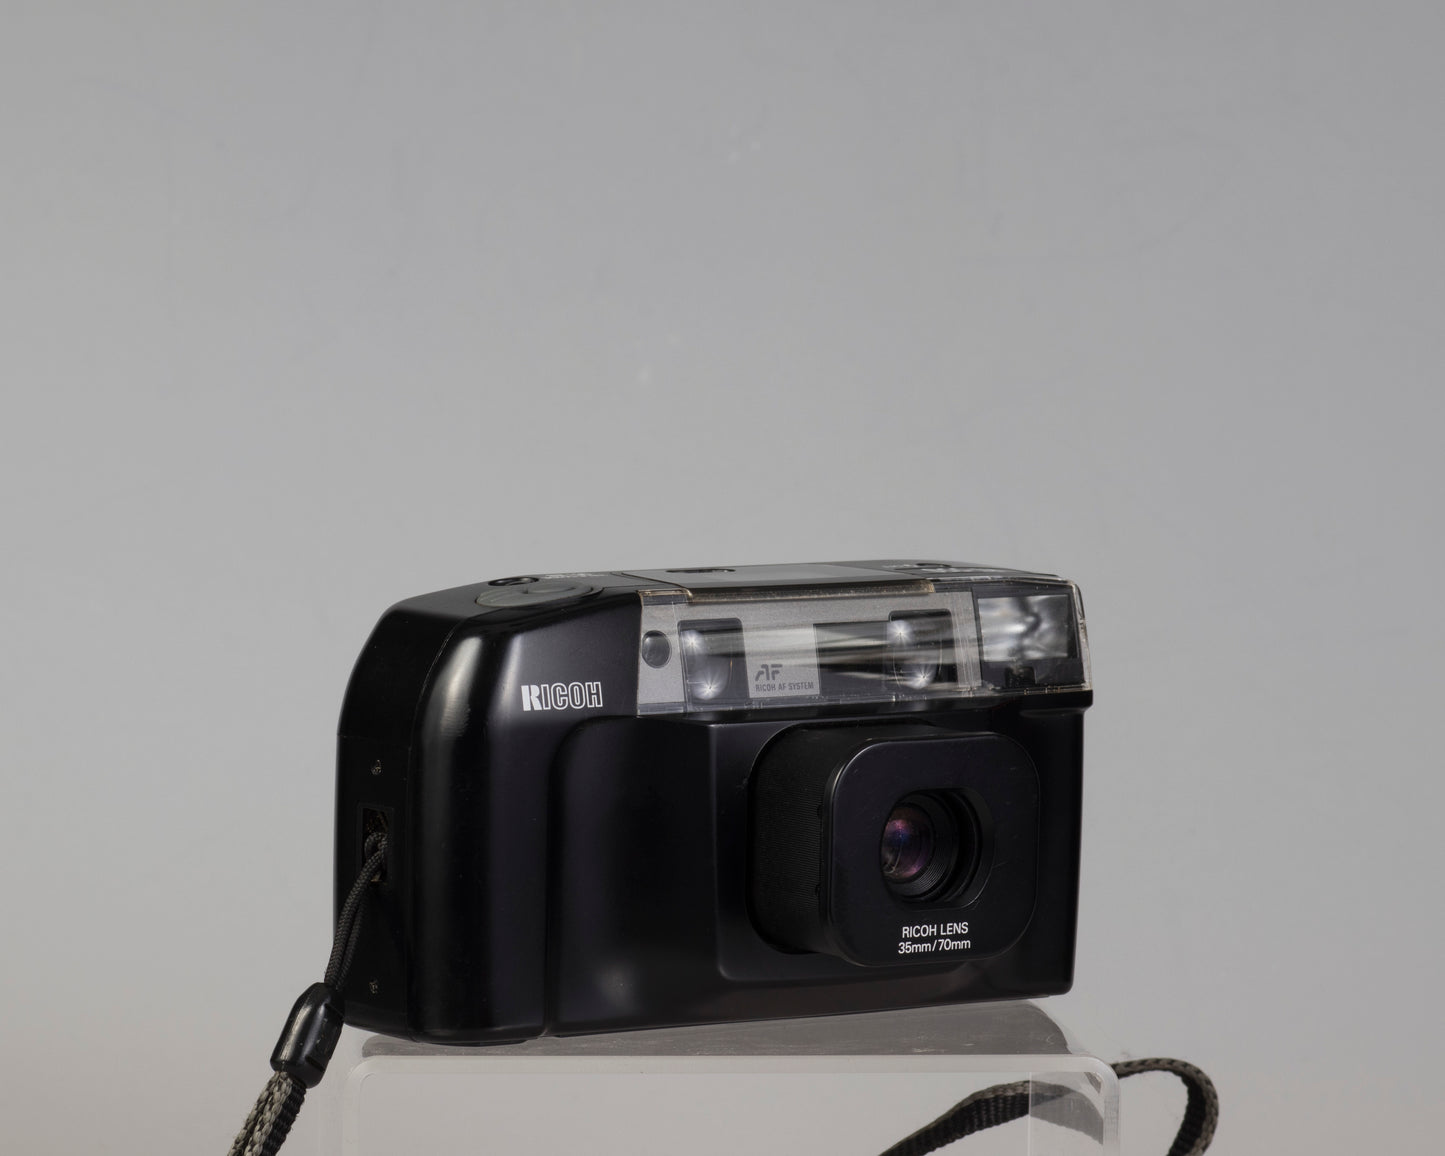 The Ricoh RT-550 dual lens 35mm point-and-shoot camera